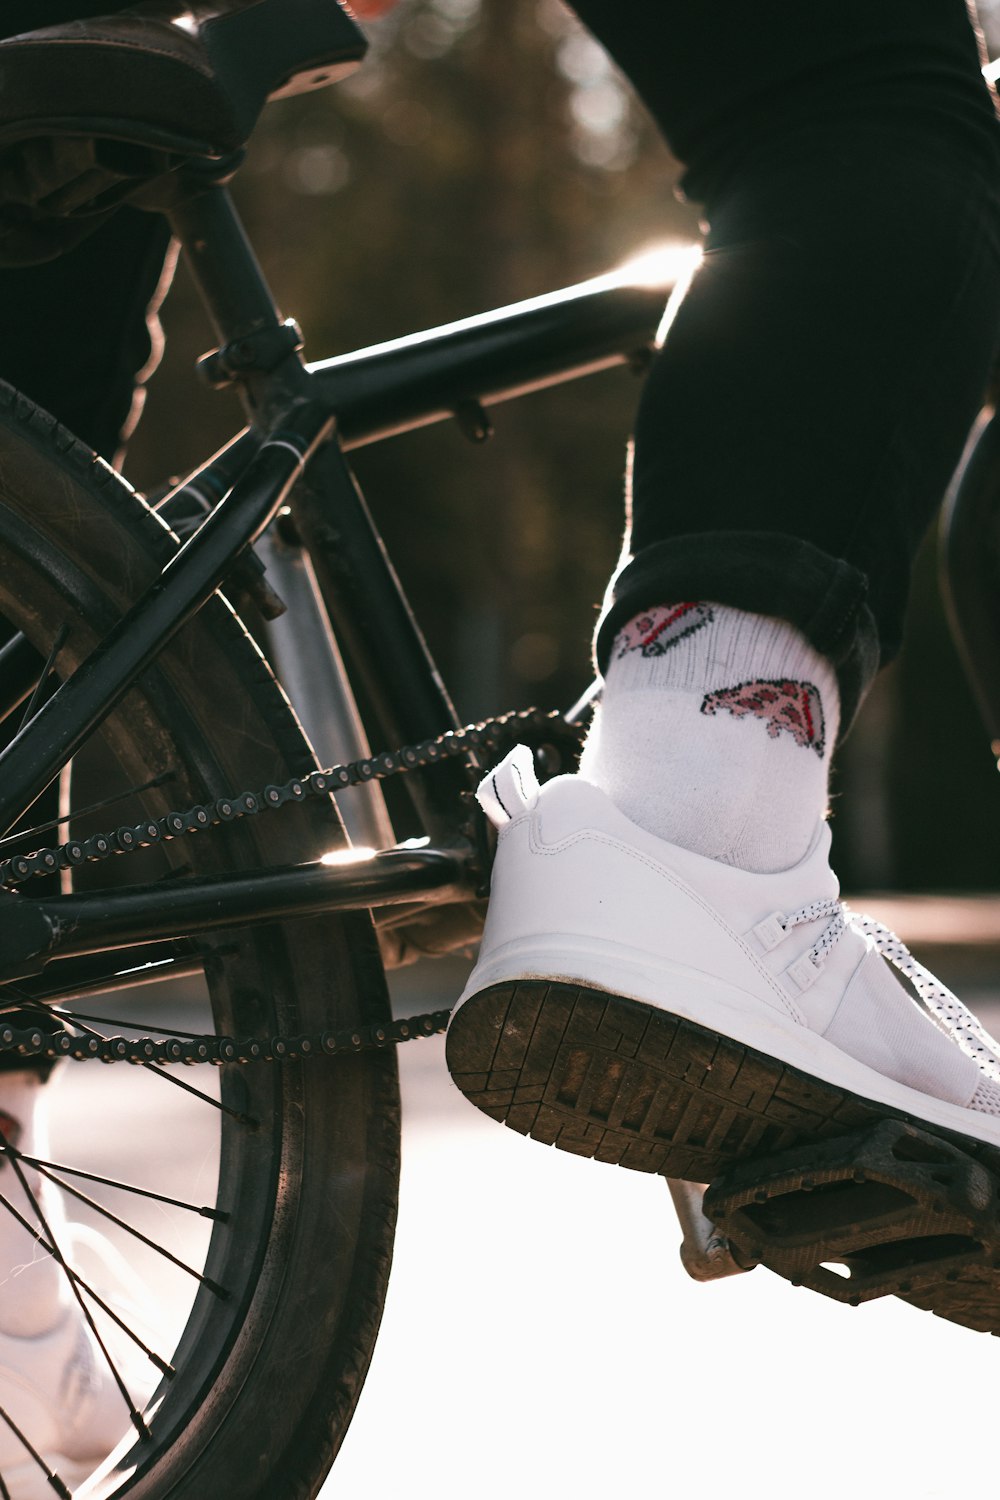 person wearing white nike athletic shoes riding bicycle